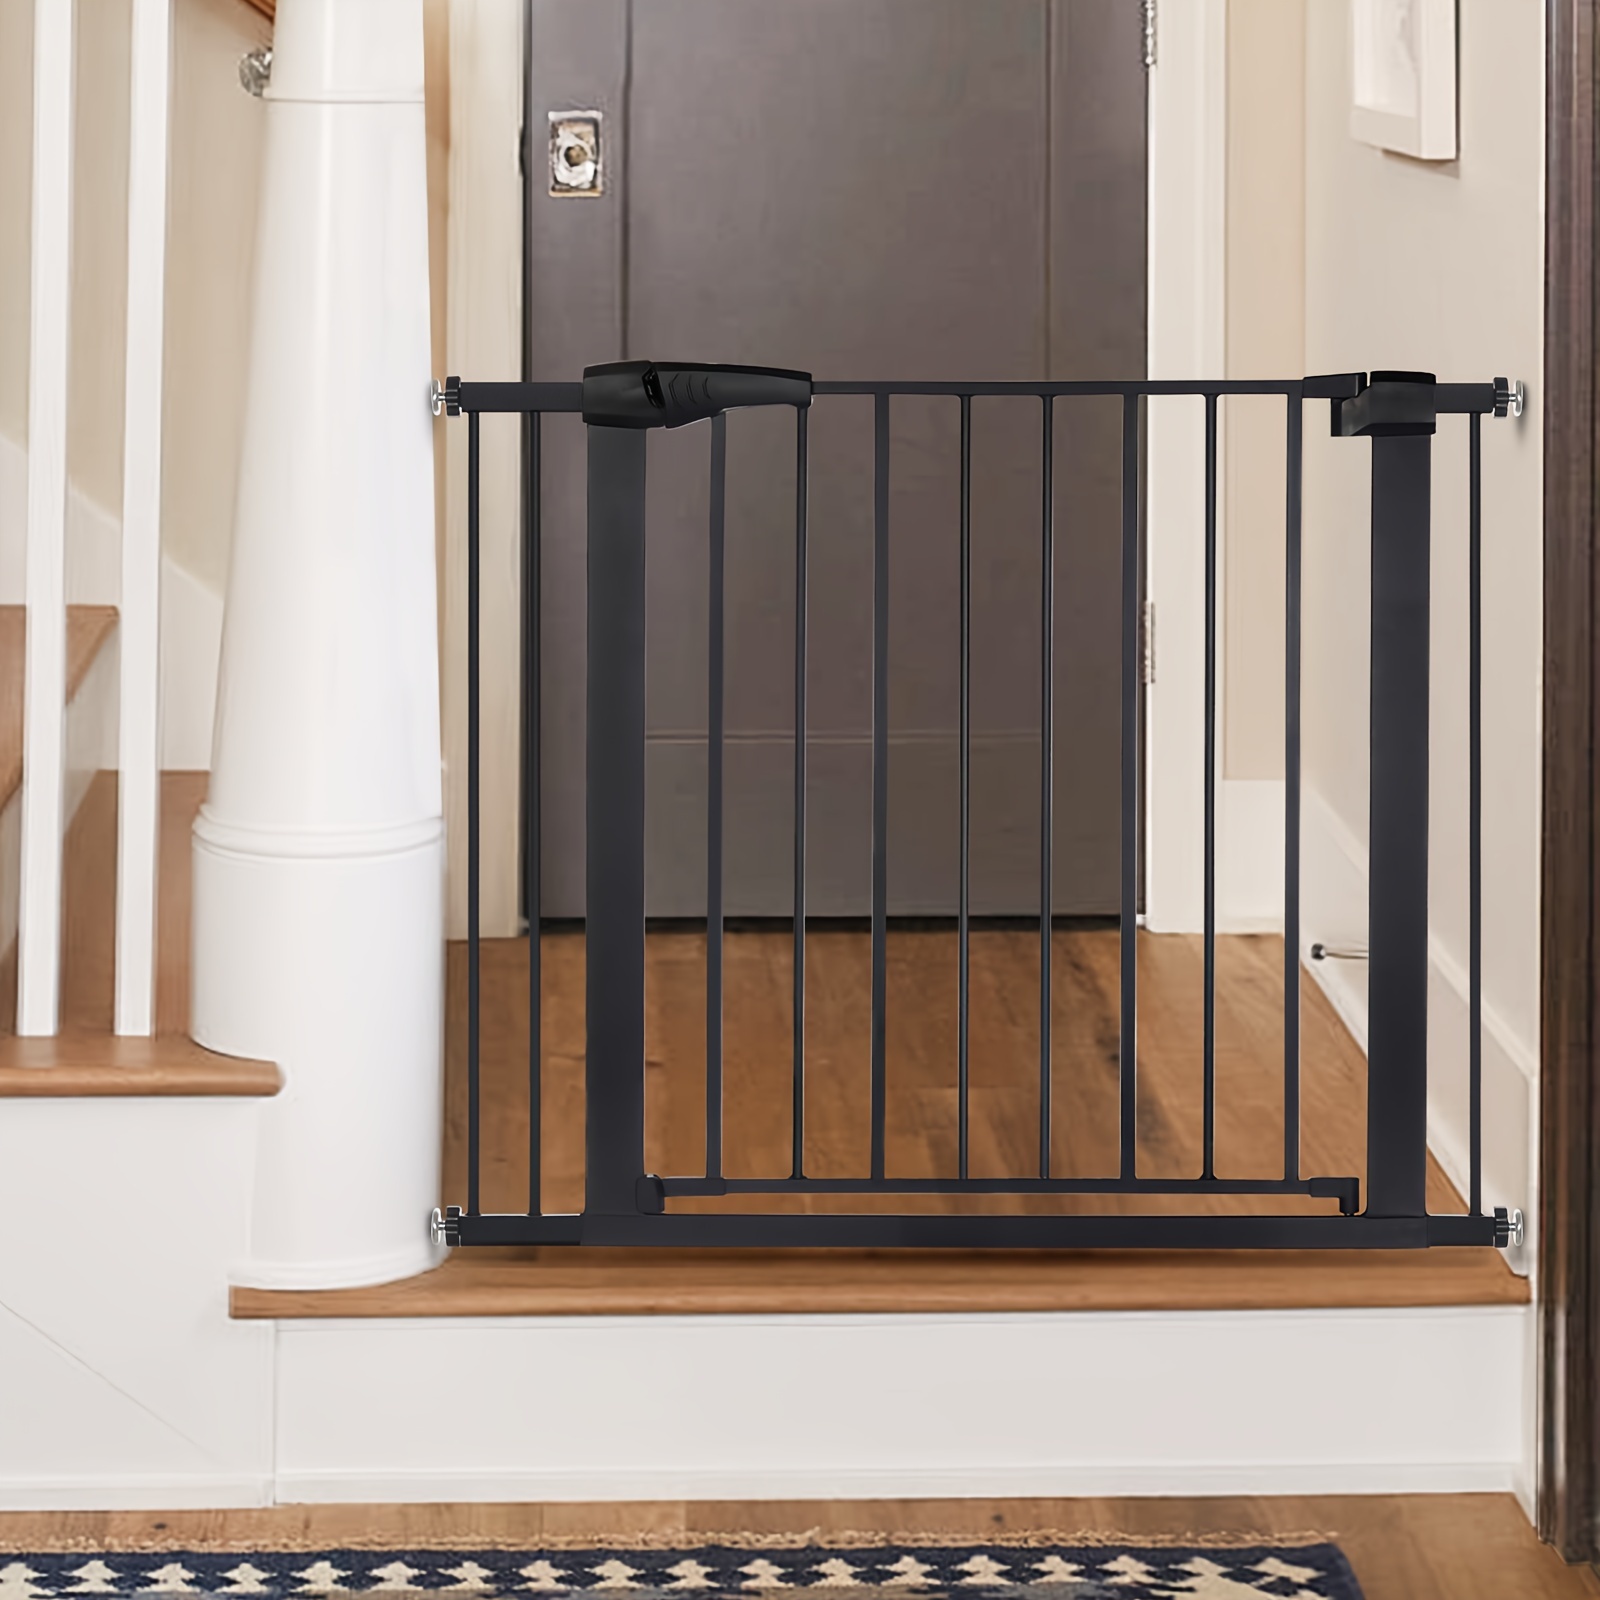 

Extra Wide Baby Gate 29.5"-40.5", Auto Close Dog Gate For House Doorways Stairs, Pressure Mounted Easy Walk Thru Pet Gate Safety Child Gate, Includes 4 Wall Cups And 2 Extension Pieces